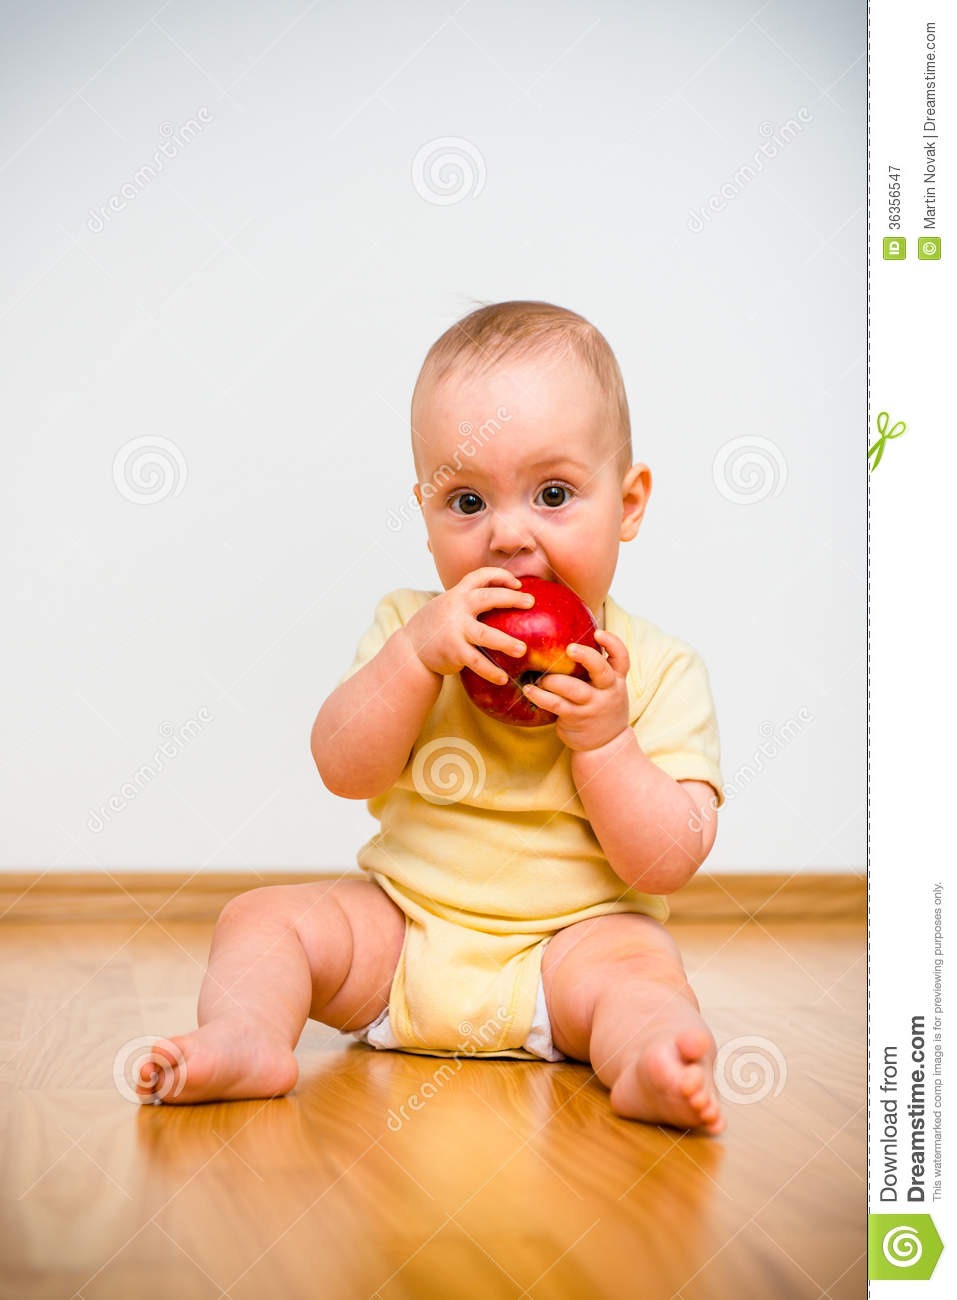 Baby Eating Apple Royalty Free Stock Photography   Image  36356547